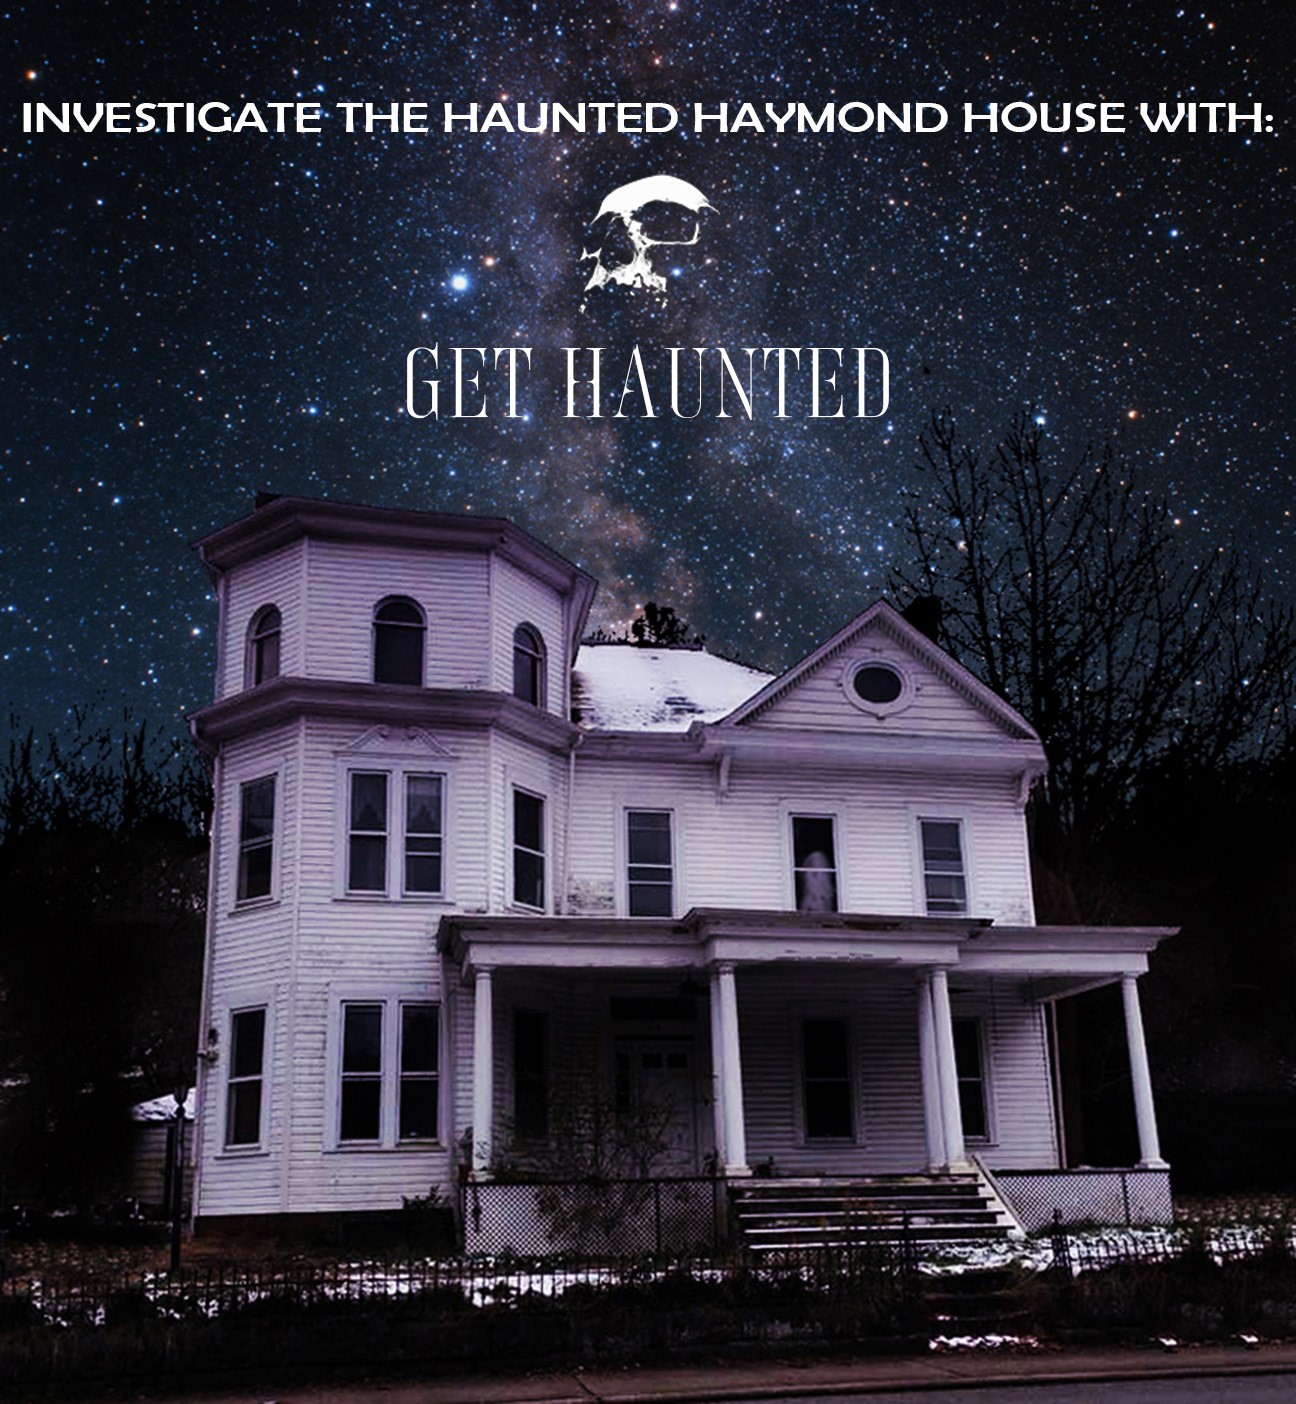 Investigate the Haunted Haymond House Sleepover Paranormal Investigation on Jun 11, 19:30@The Haymond House - Buy tickets and Get information on Thriller Events thriller.events